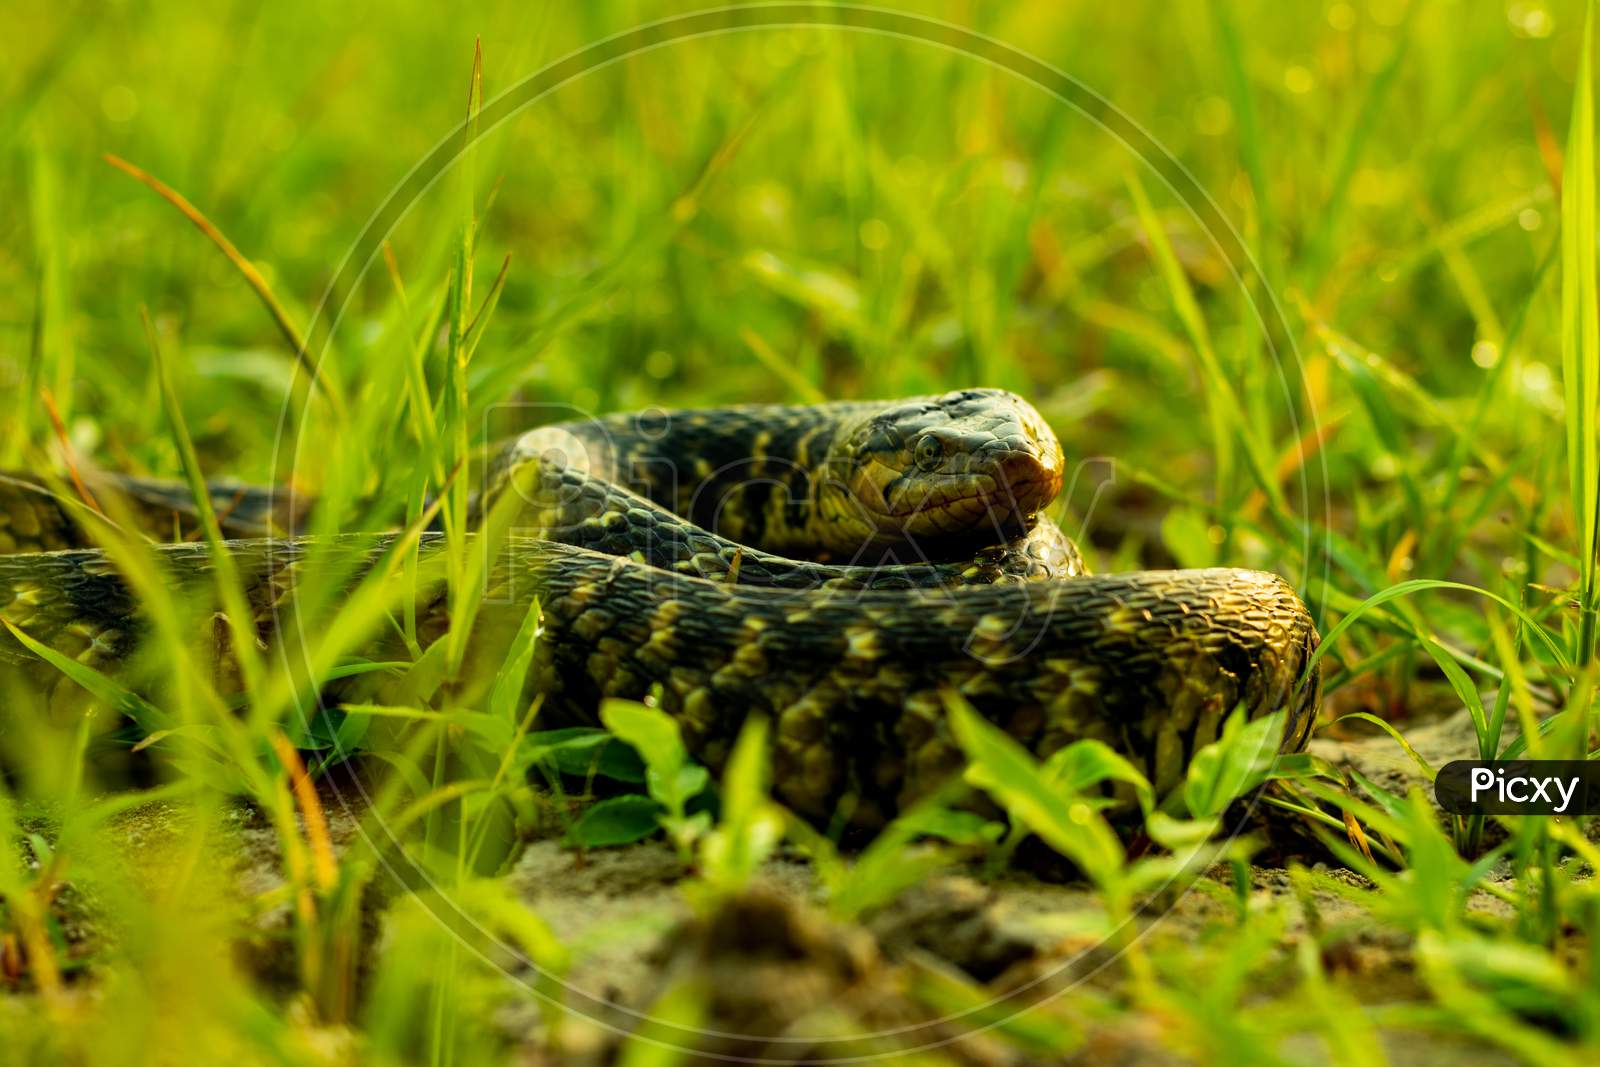 Pet Snake Buff Striped Keelback Slowly Sitting Rounded On The Green Grass